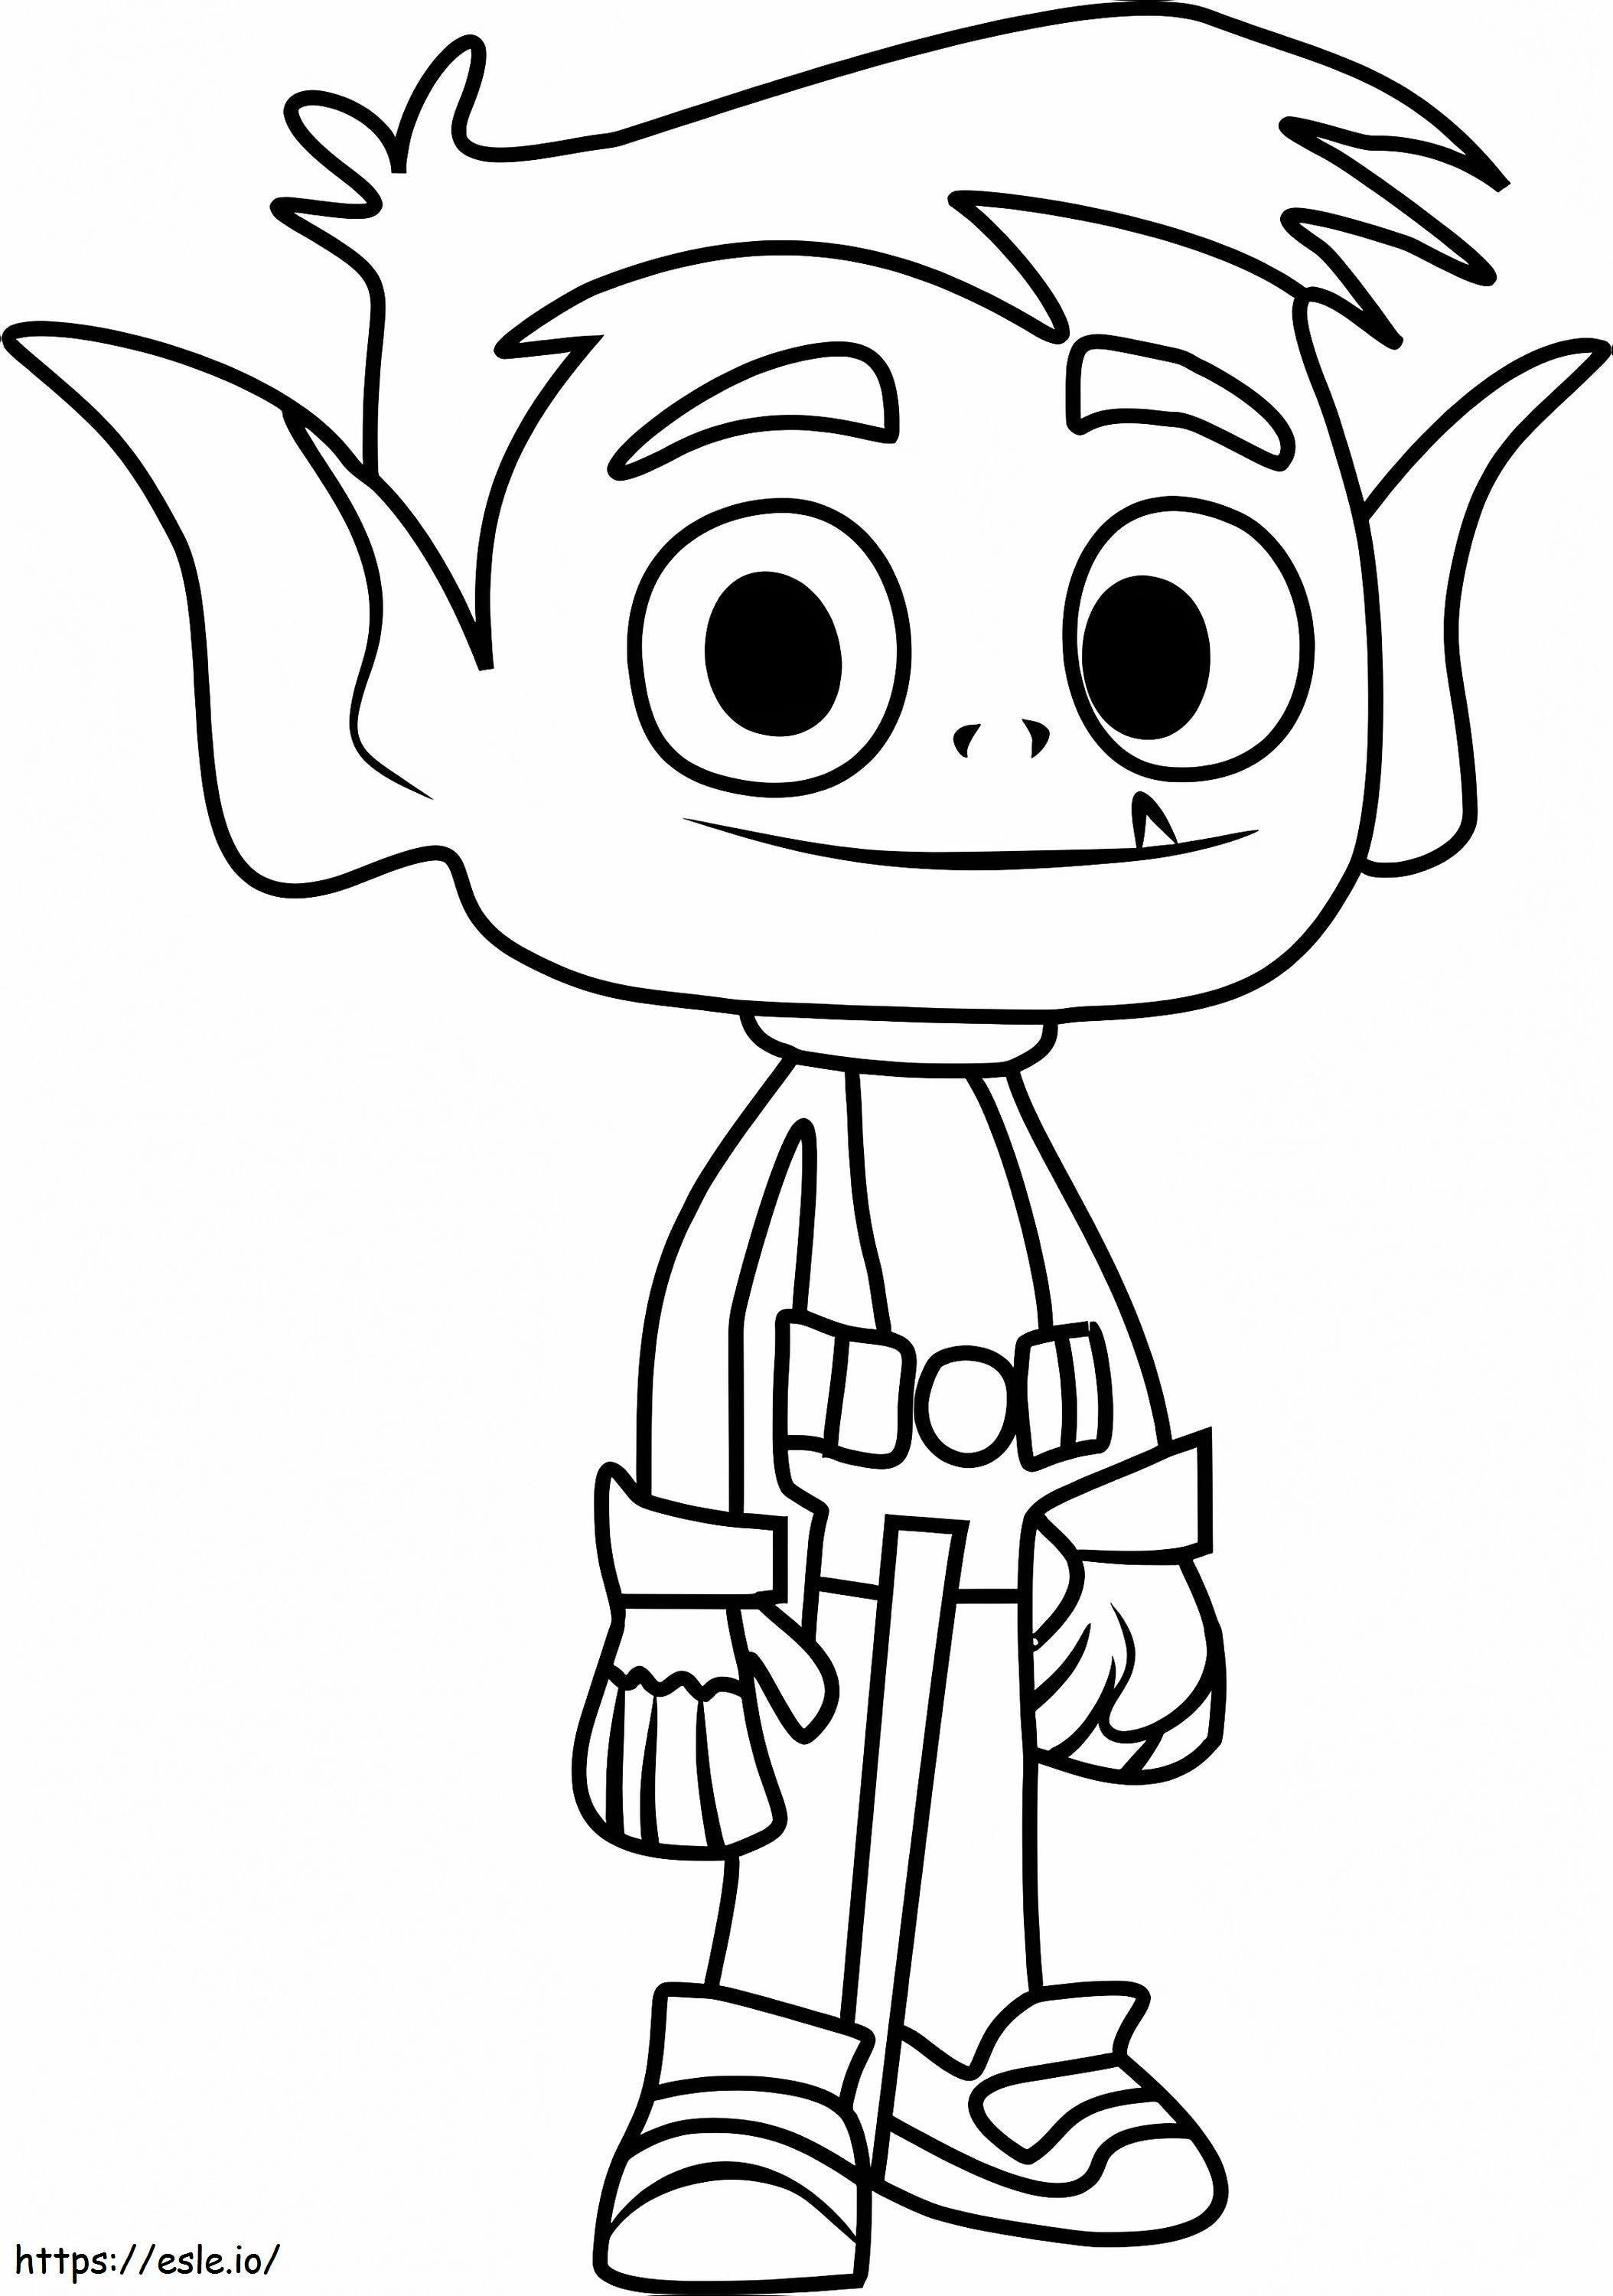 Beast Boy coloring page